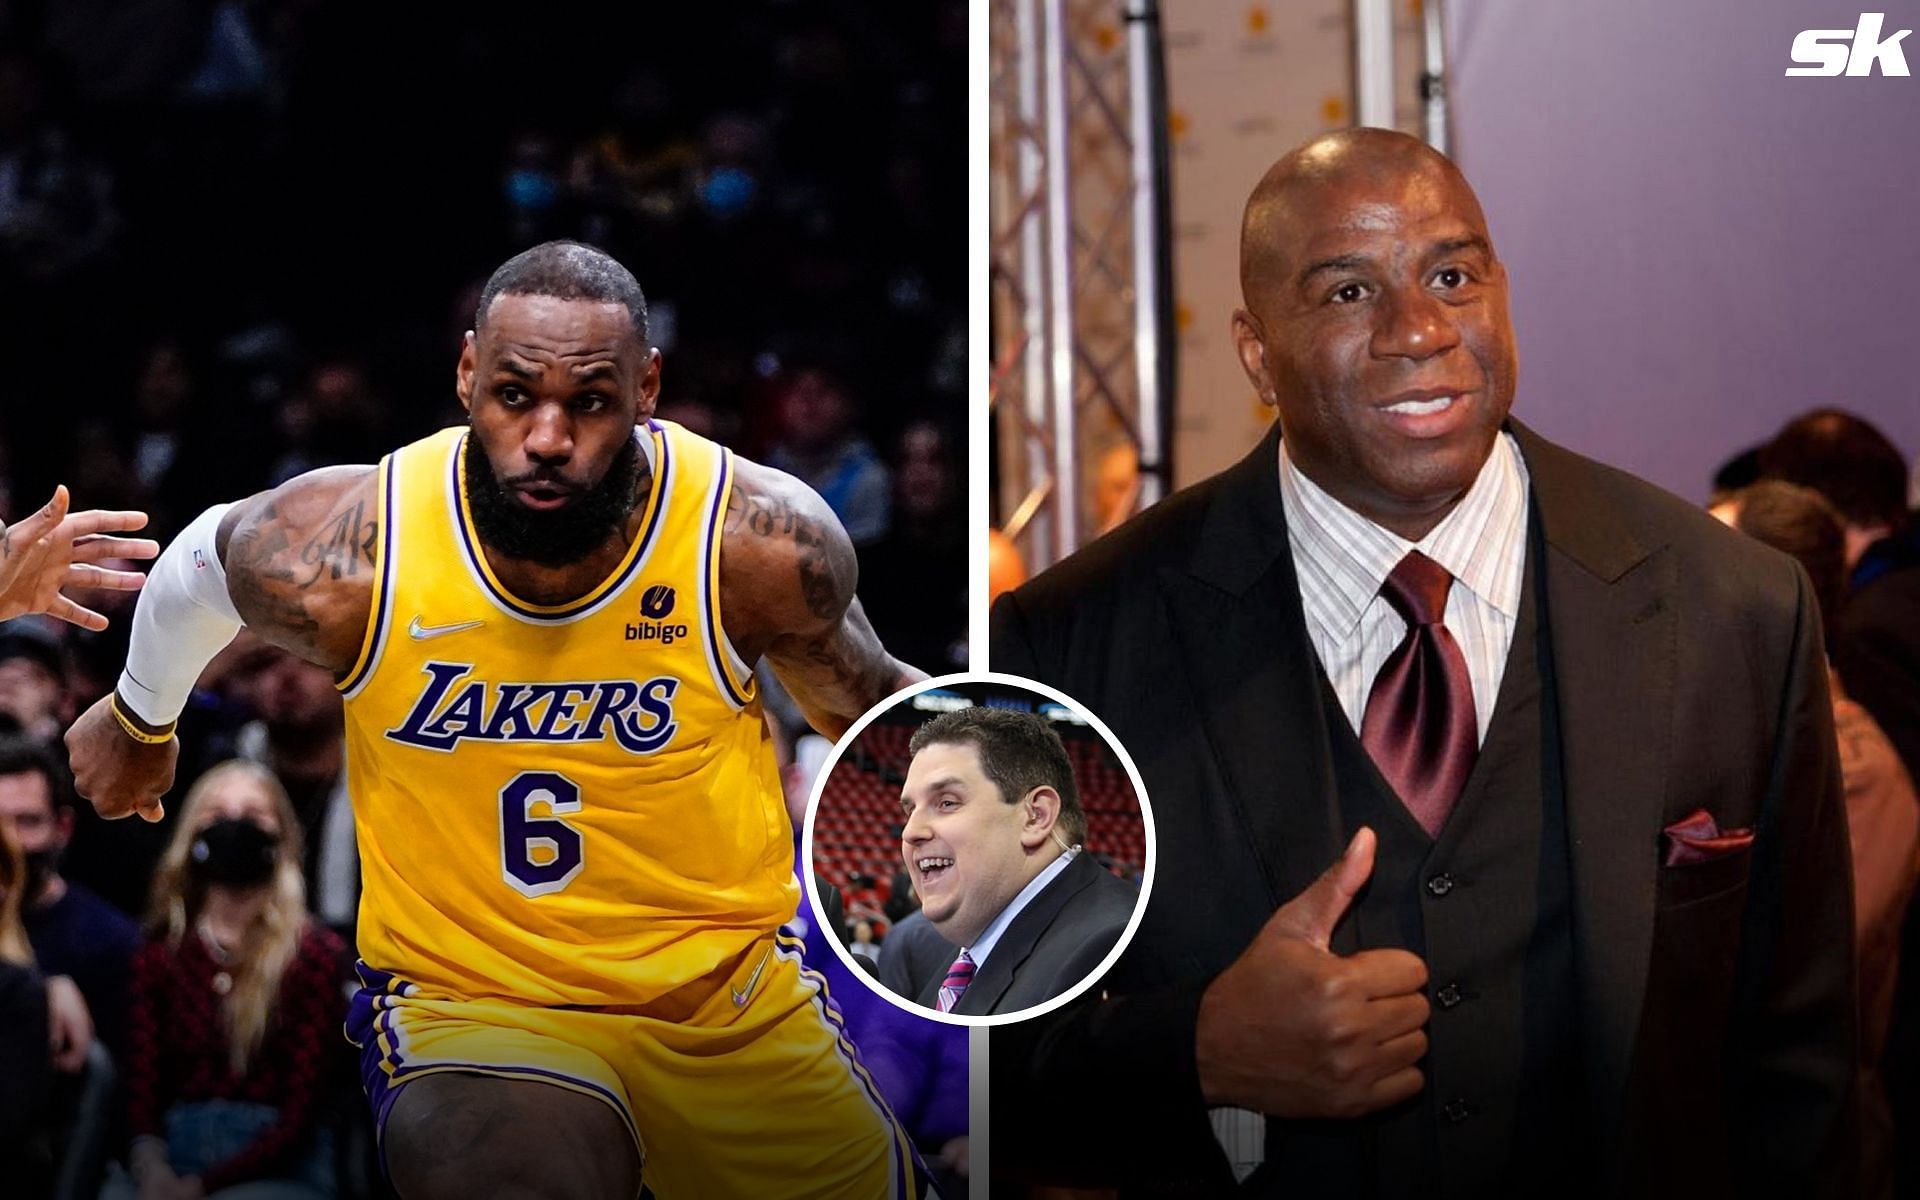 Brian Windhorst believes LeBron James and Magic Johnson are not on best terms at the moment. The 5-time NBA Champion and Hall of Famer was said to have ripped the cord without talking to James.